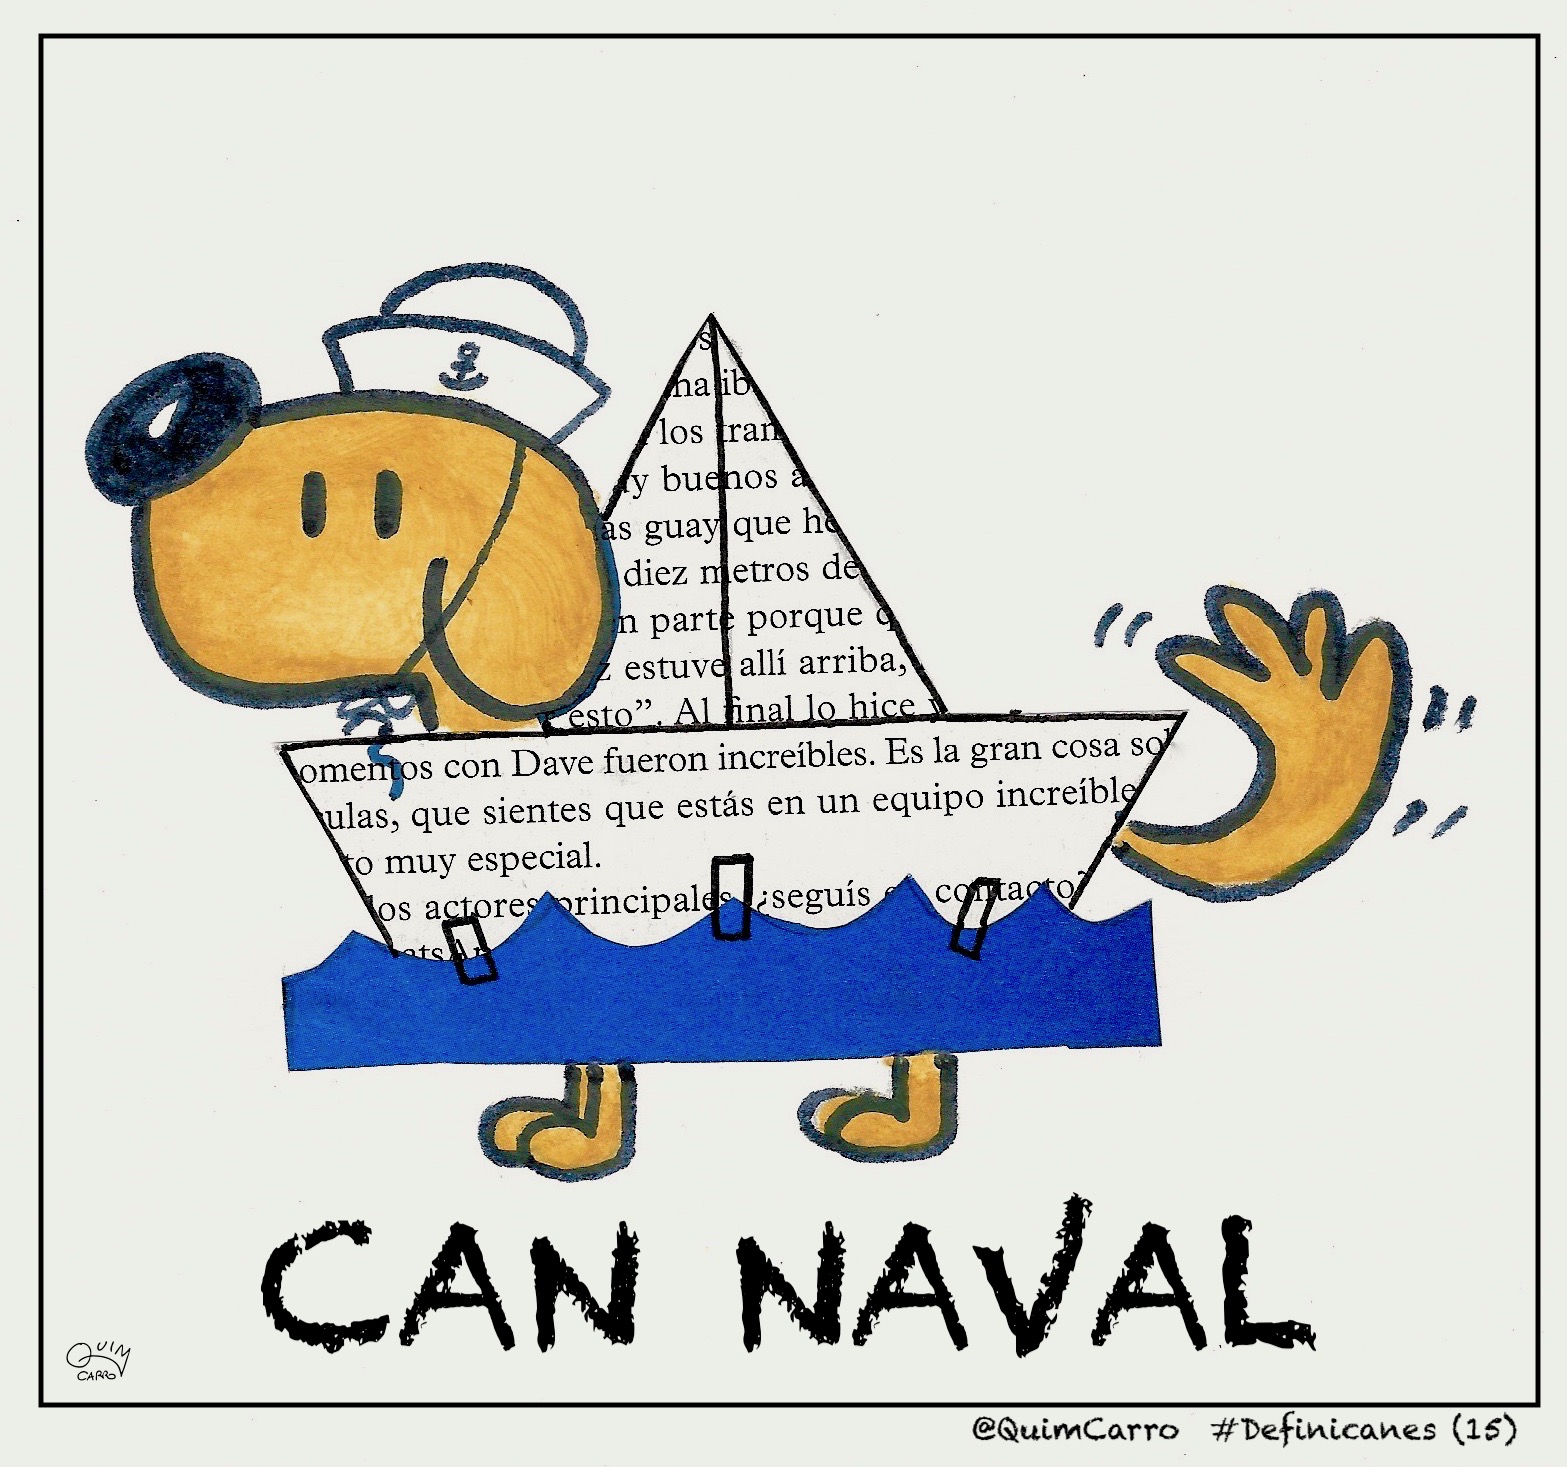 Can Naval